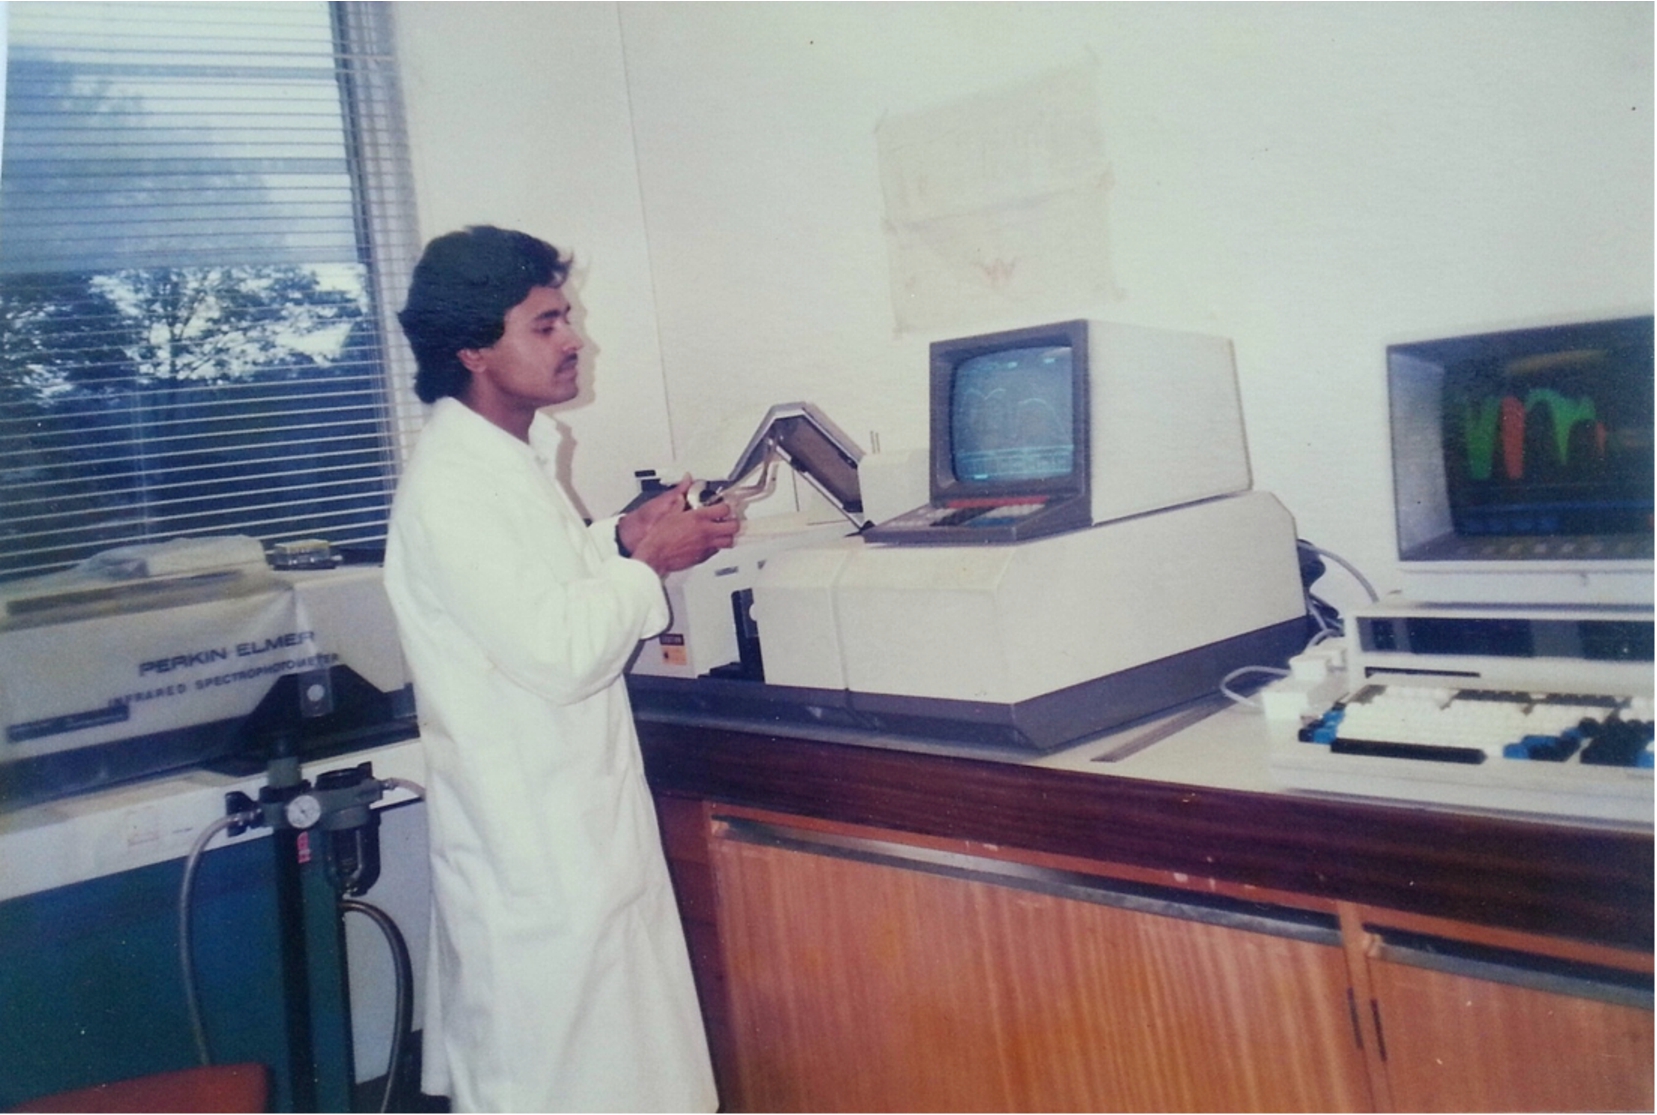 Author of this article recording FTIR spectra of H2O at the Royal Free Hospital School of Medicine, University of London. Spectra of H2O and 2H2O can be seen displayed on a computer attached to the FTIR spectrometer (photograph taken in 1987).